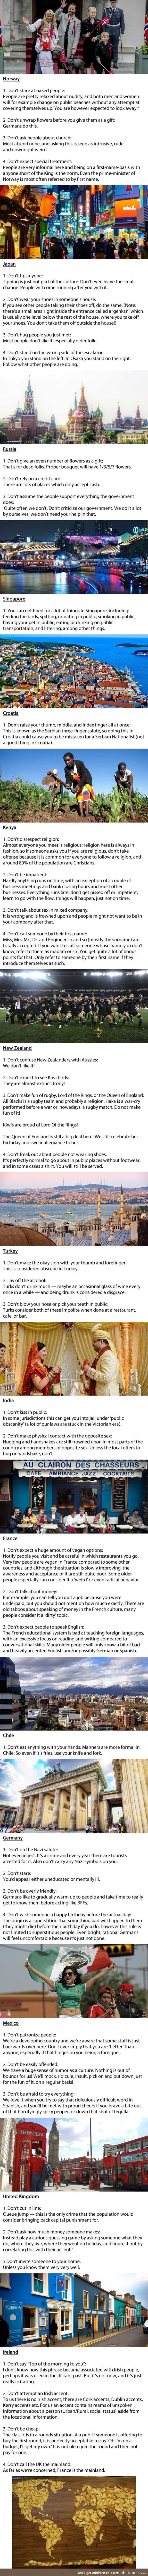 What not to do in some countries